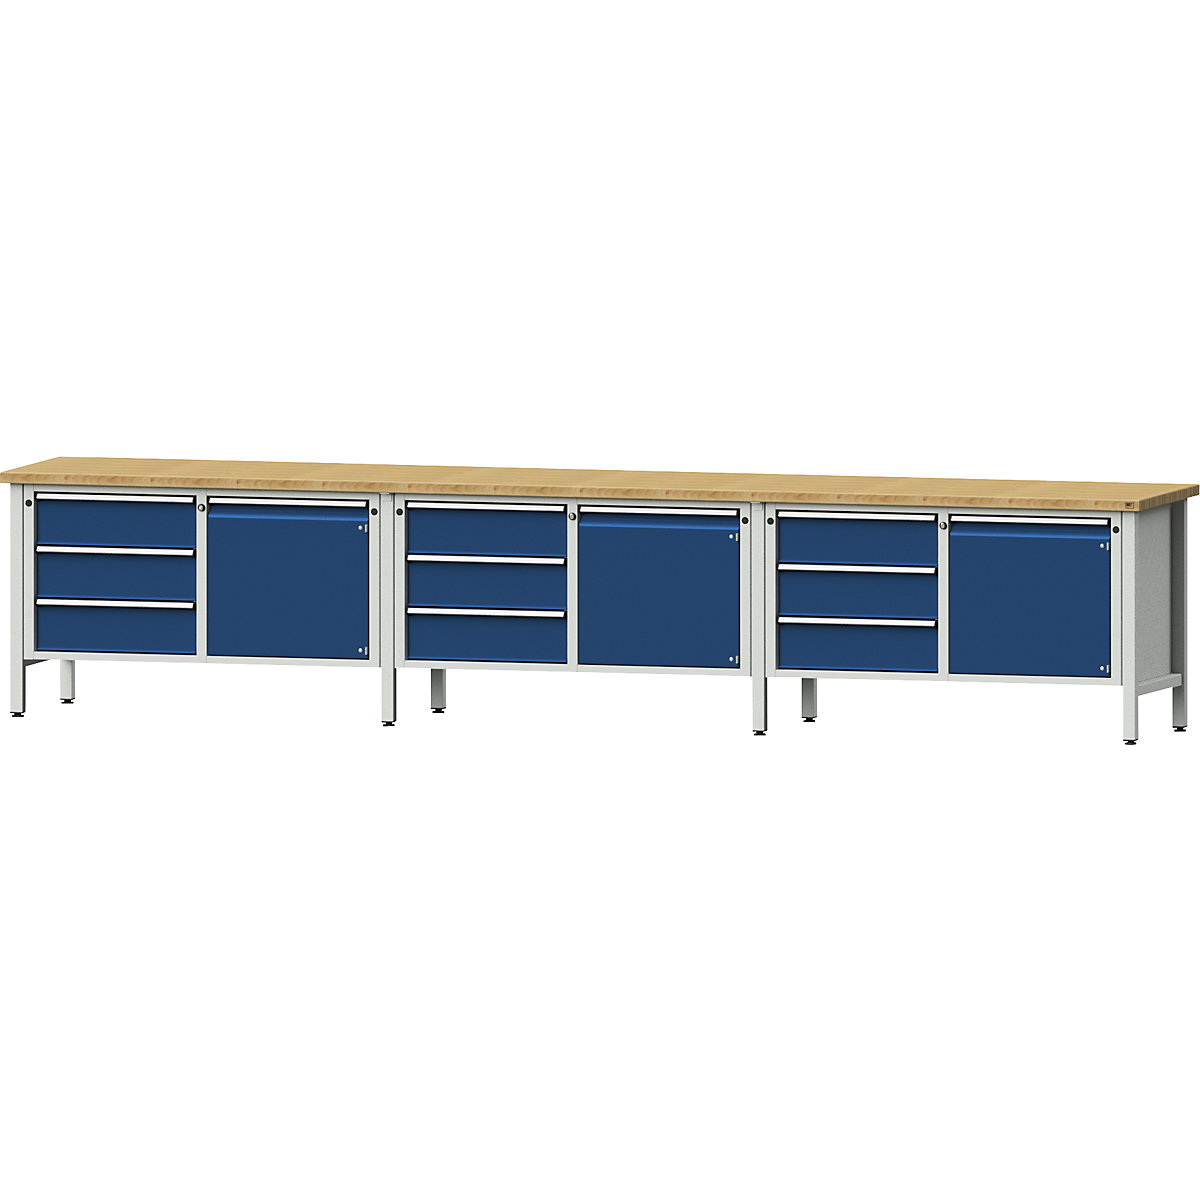 Workbench extra wide, frame construction - ANKE